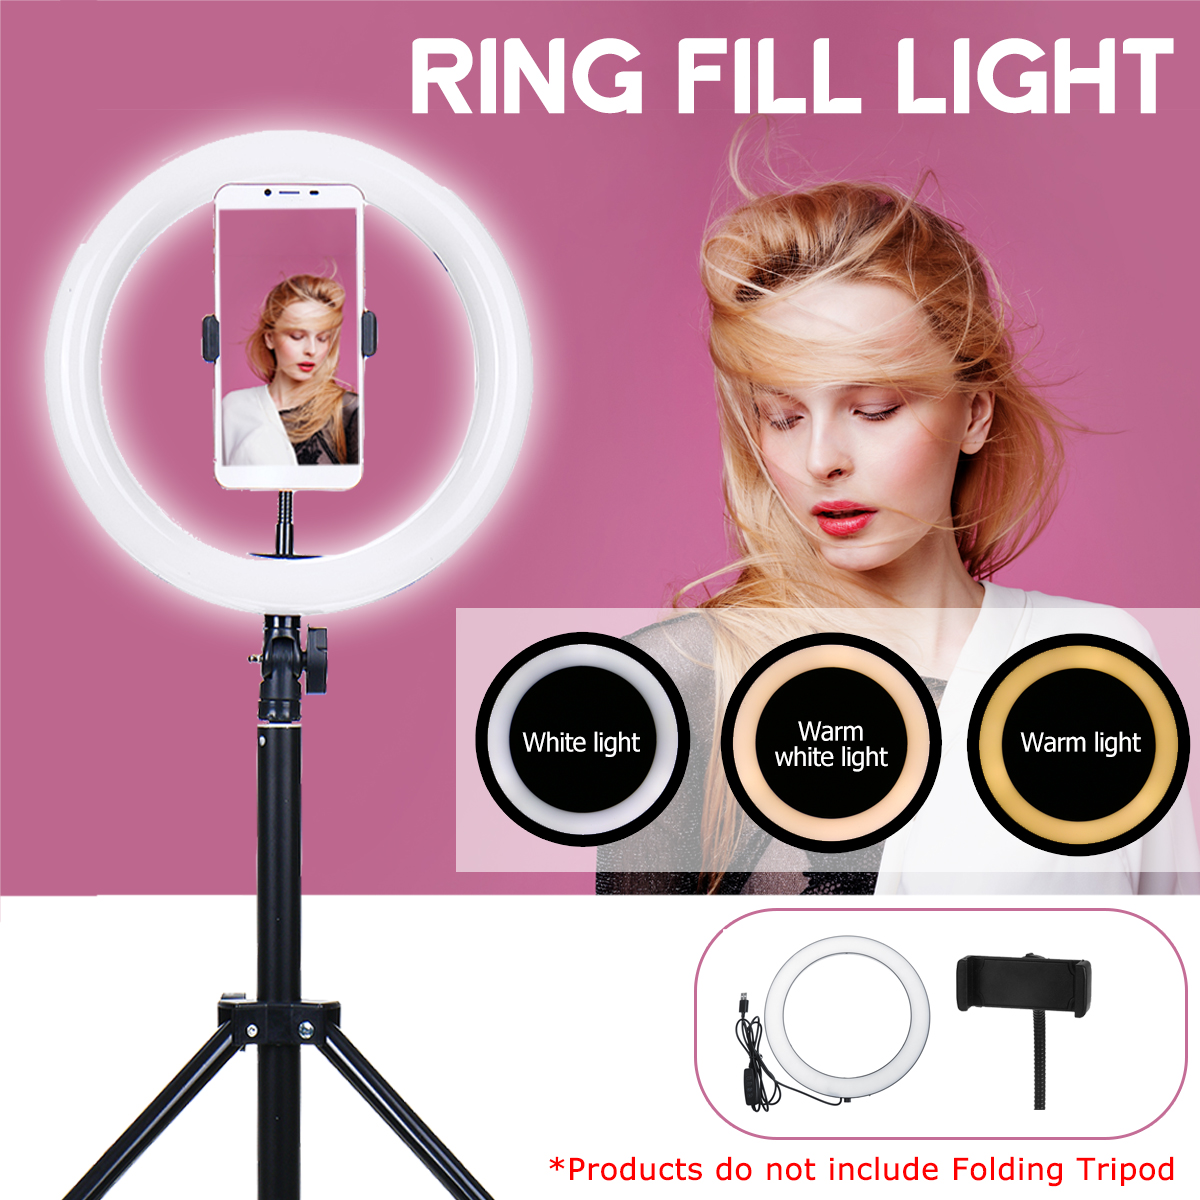 LED-Ring-Fill-Light-Studio-Lamp-Photographic-For-Video-Live-Beauty-Makeup-Mirror-Light-Streaming-USB-1634882-1